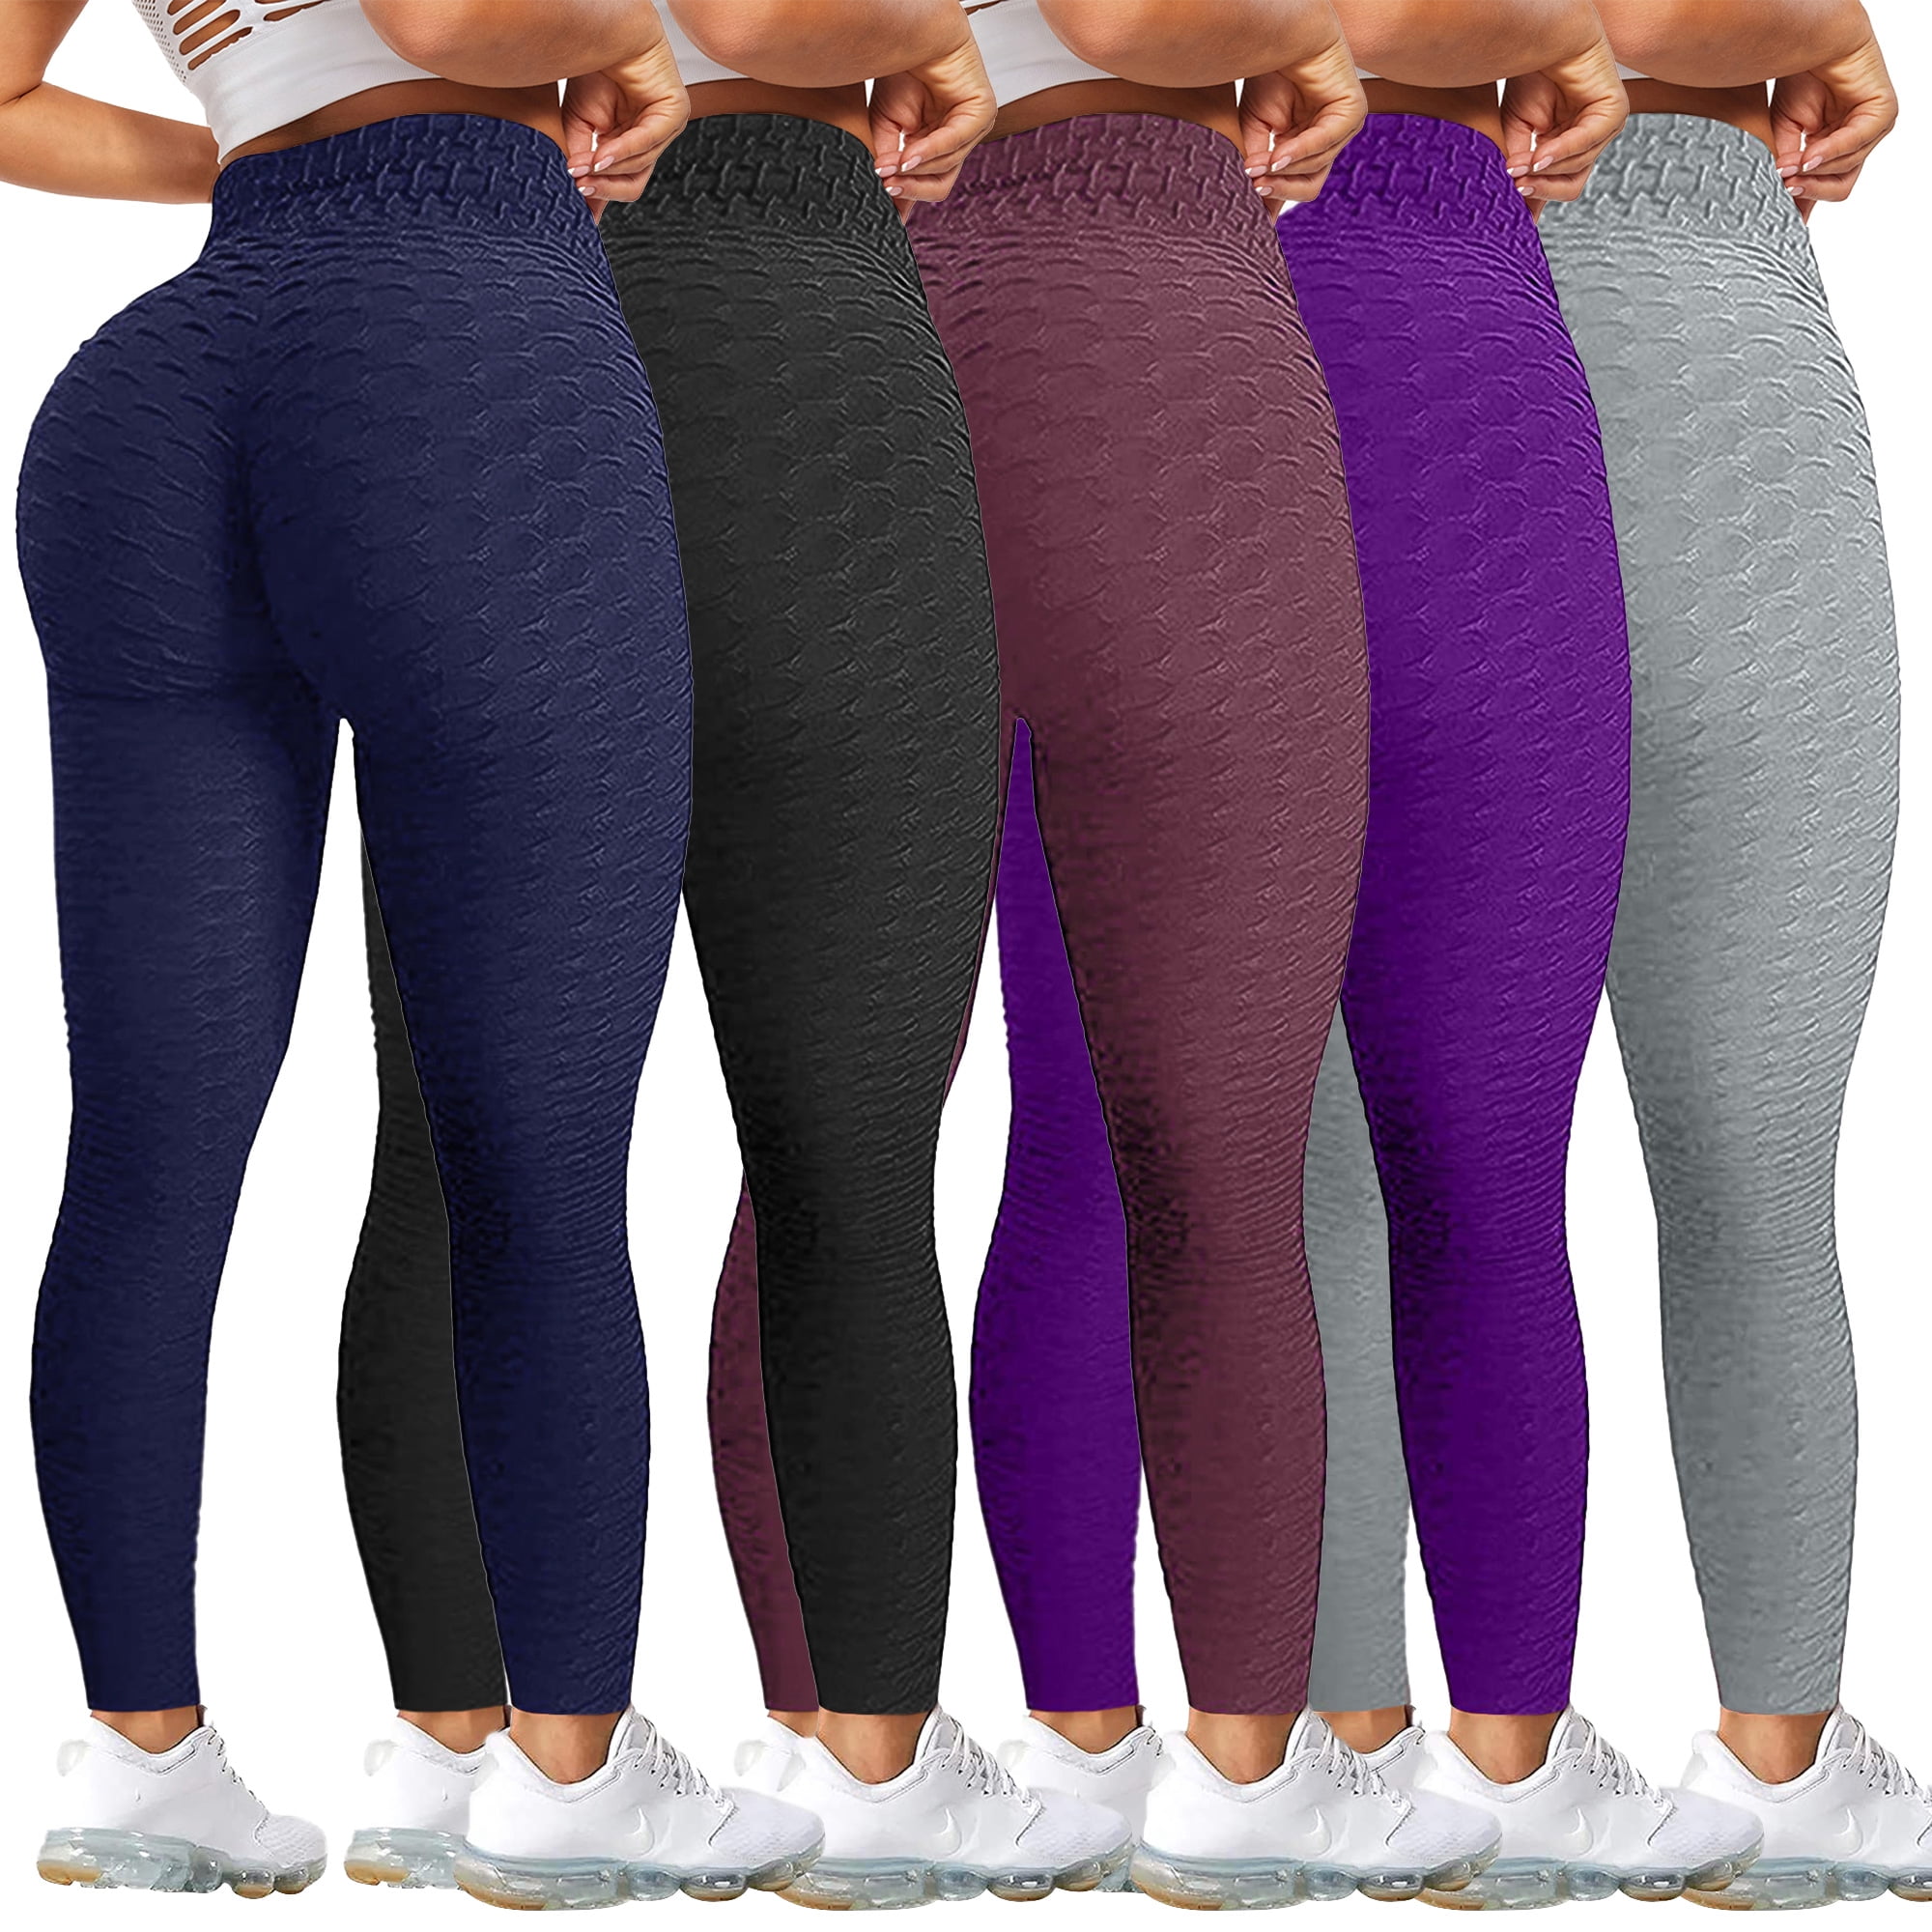 Women's Workout Yoga Pants High Waist Capris Pocket Cropped Leggings  Exercise Athletic Tights Tummy Control Trouser